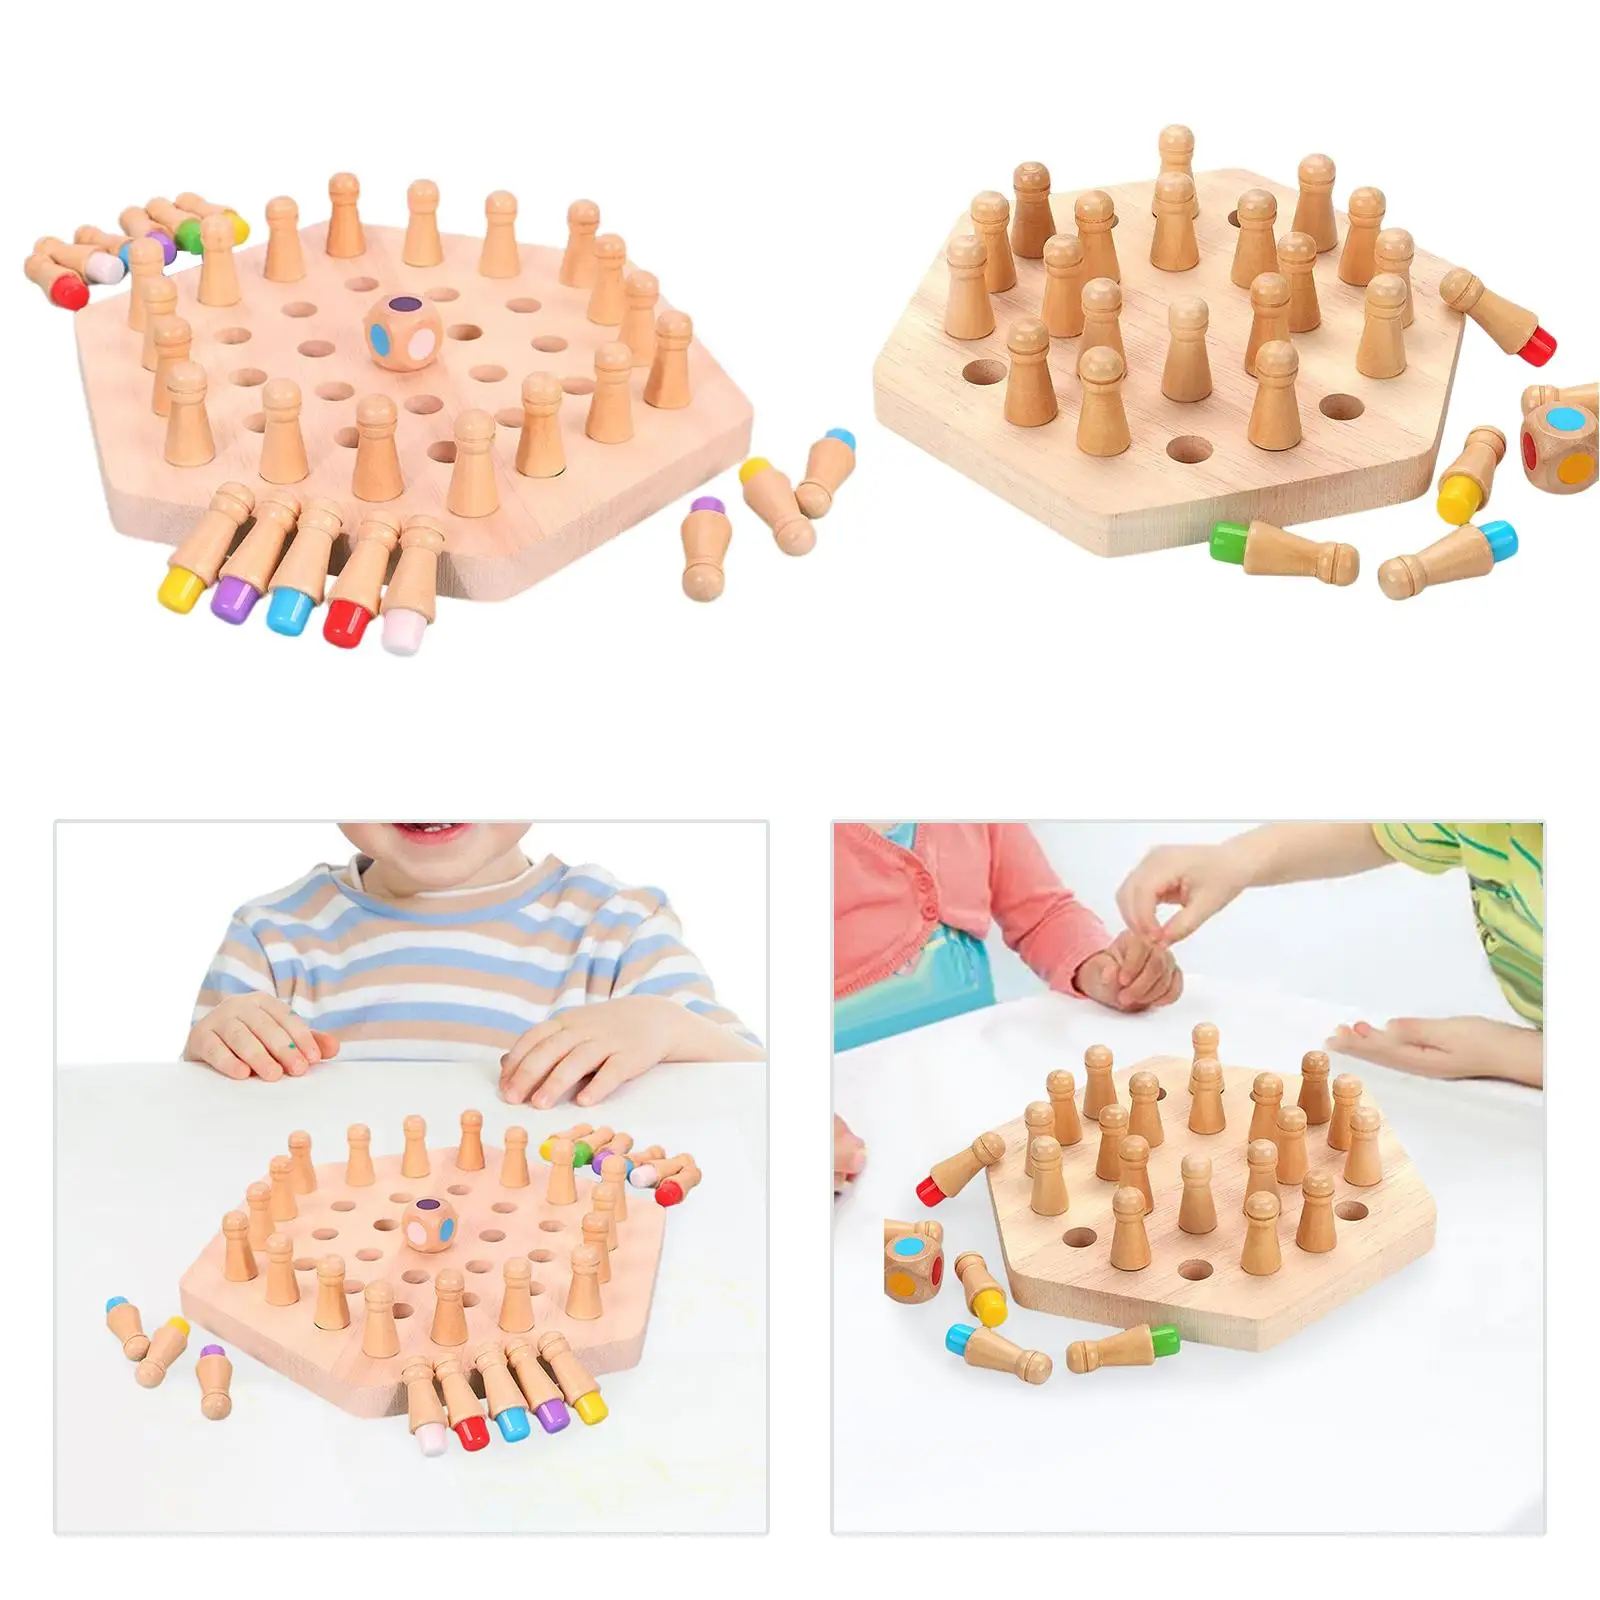 Wooden Memory Chess Game for Parent Child Development Toy Puzzle Game